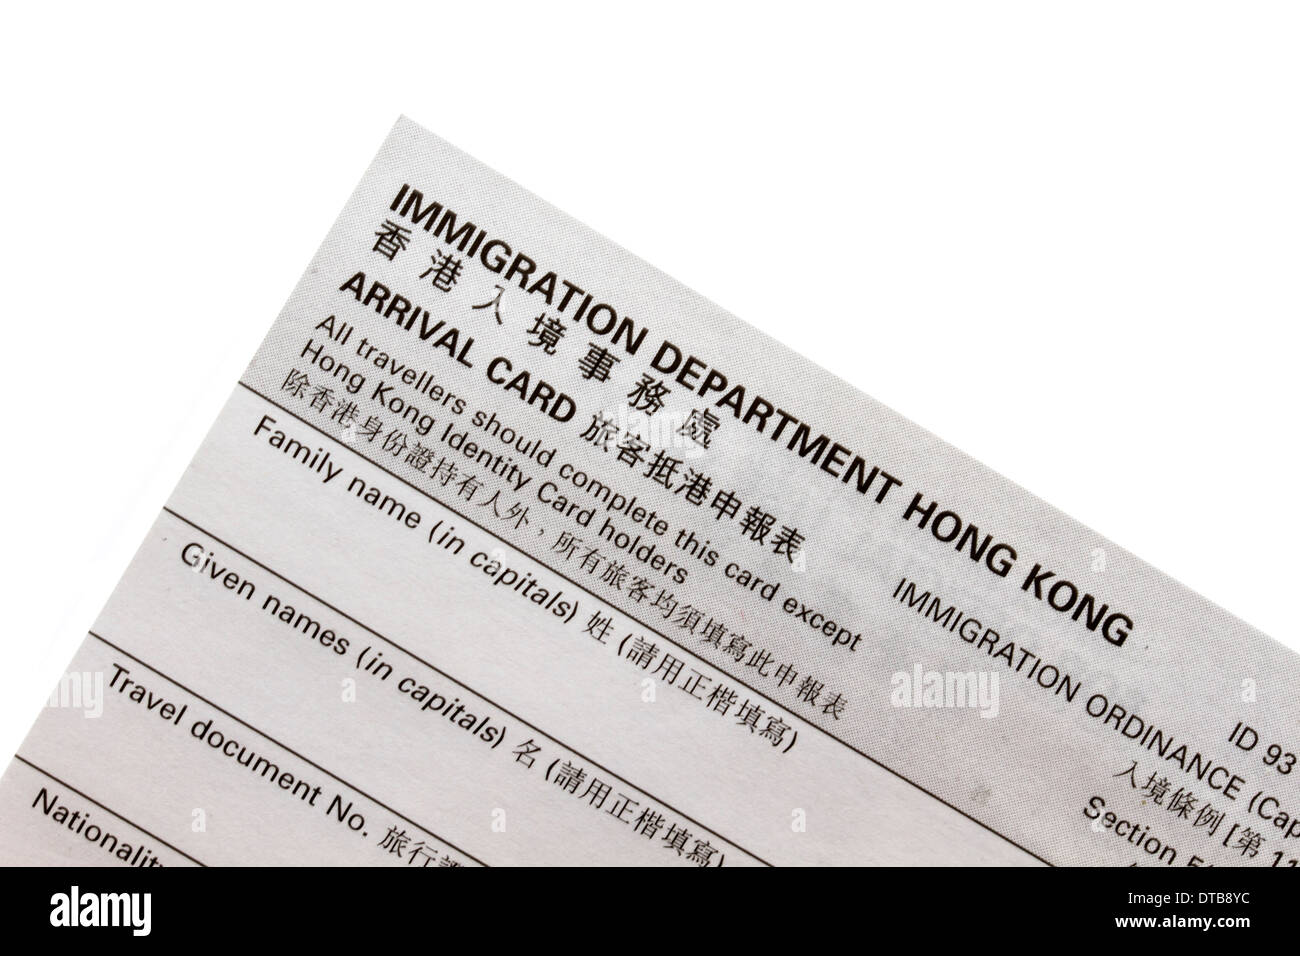 Hong Kong immigration department arrival card Stock Photo